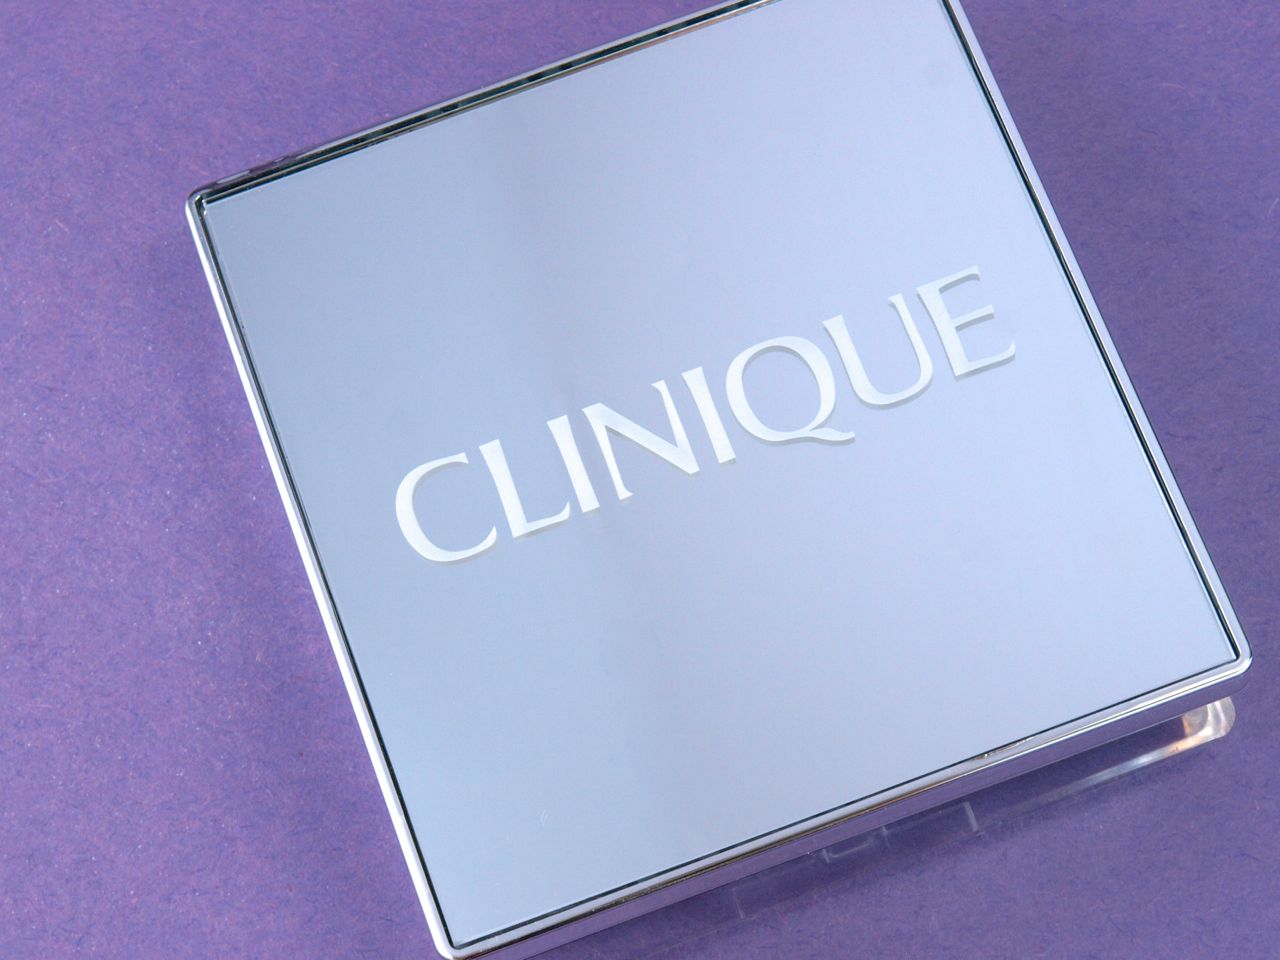 Clinique Holiday 2014 The Nutcracker Suite Collection: Review and Swatches